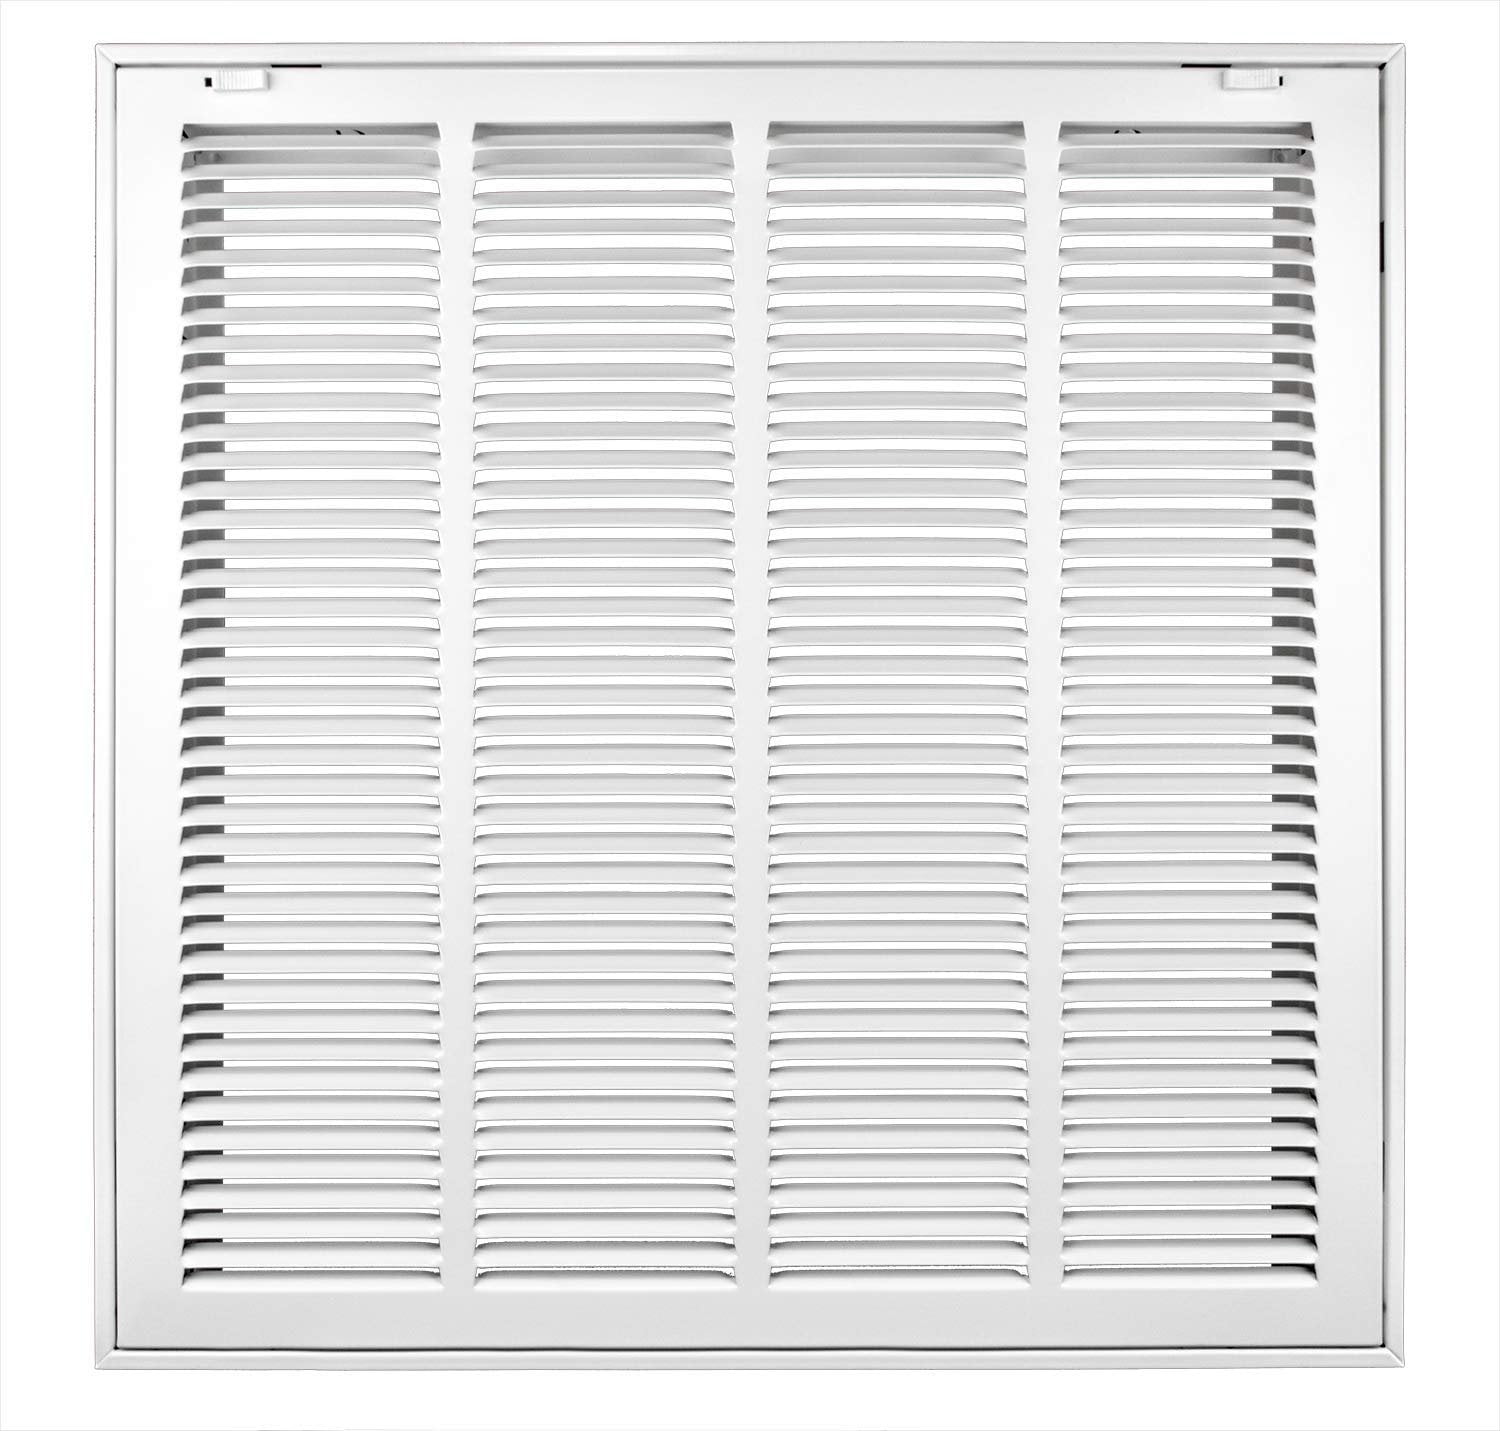 Accord ABRFWH2020 Return Filter Grille with 1/2-Inch Fin Louvered Duct Opening Measurements 20-Inch x 20-Inch White